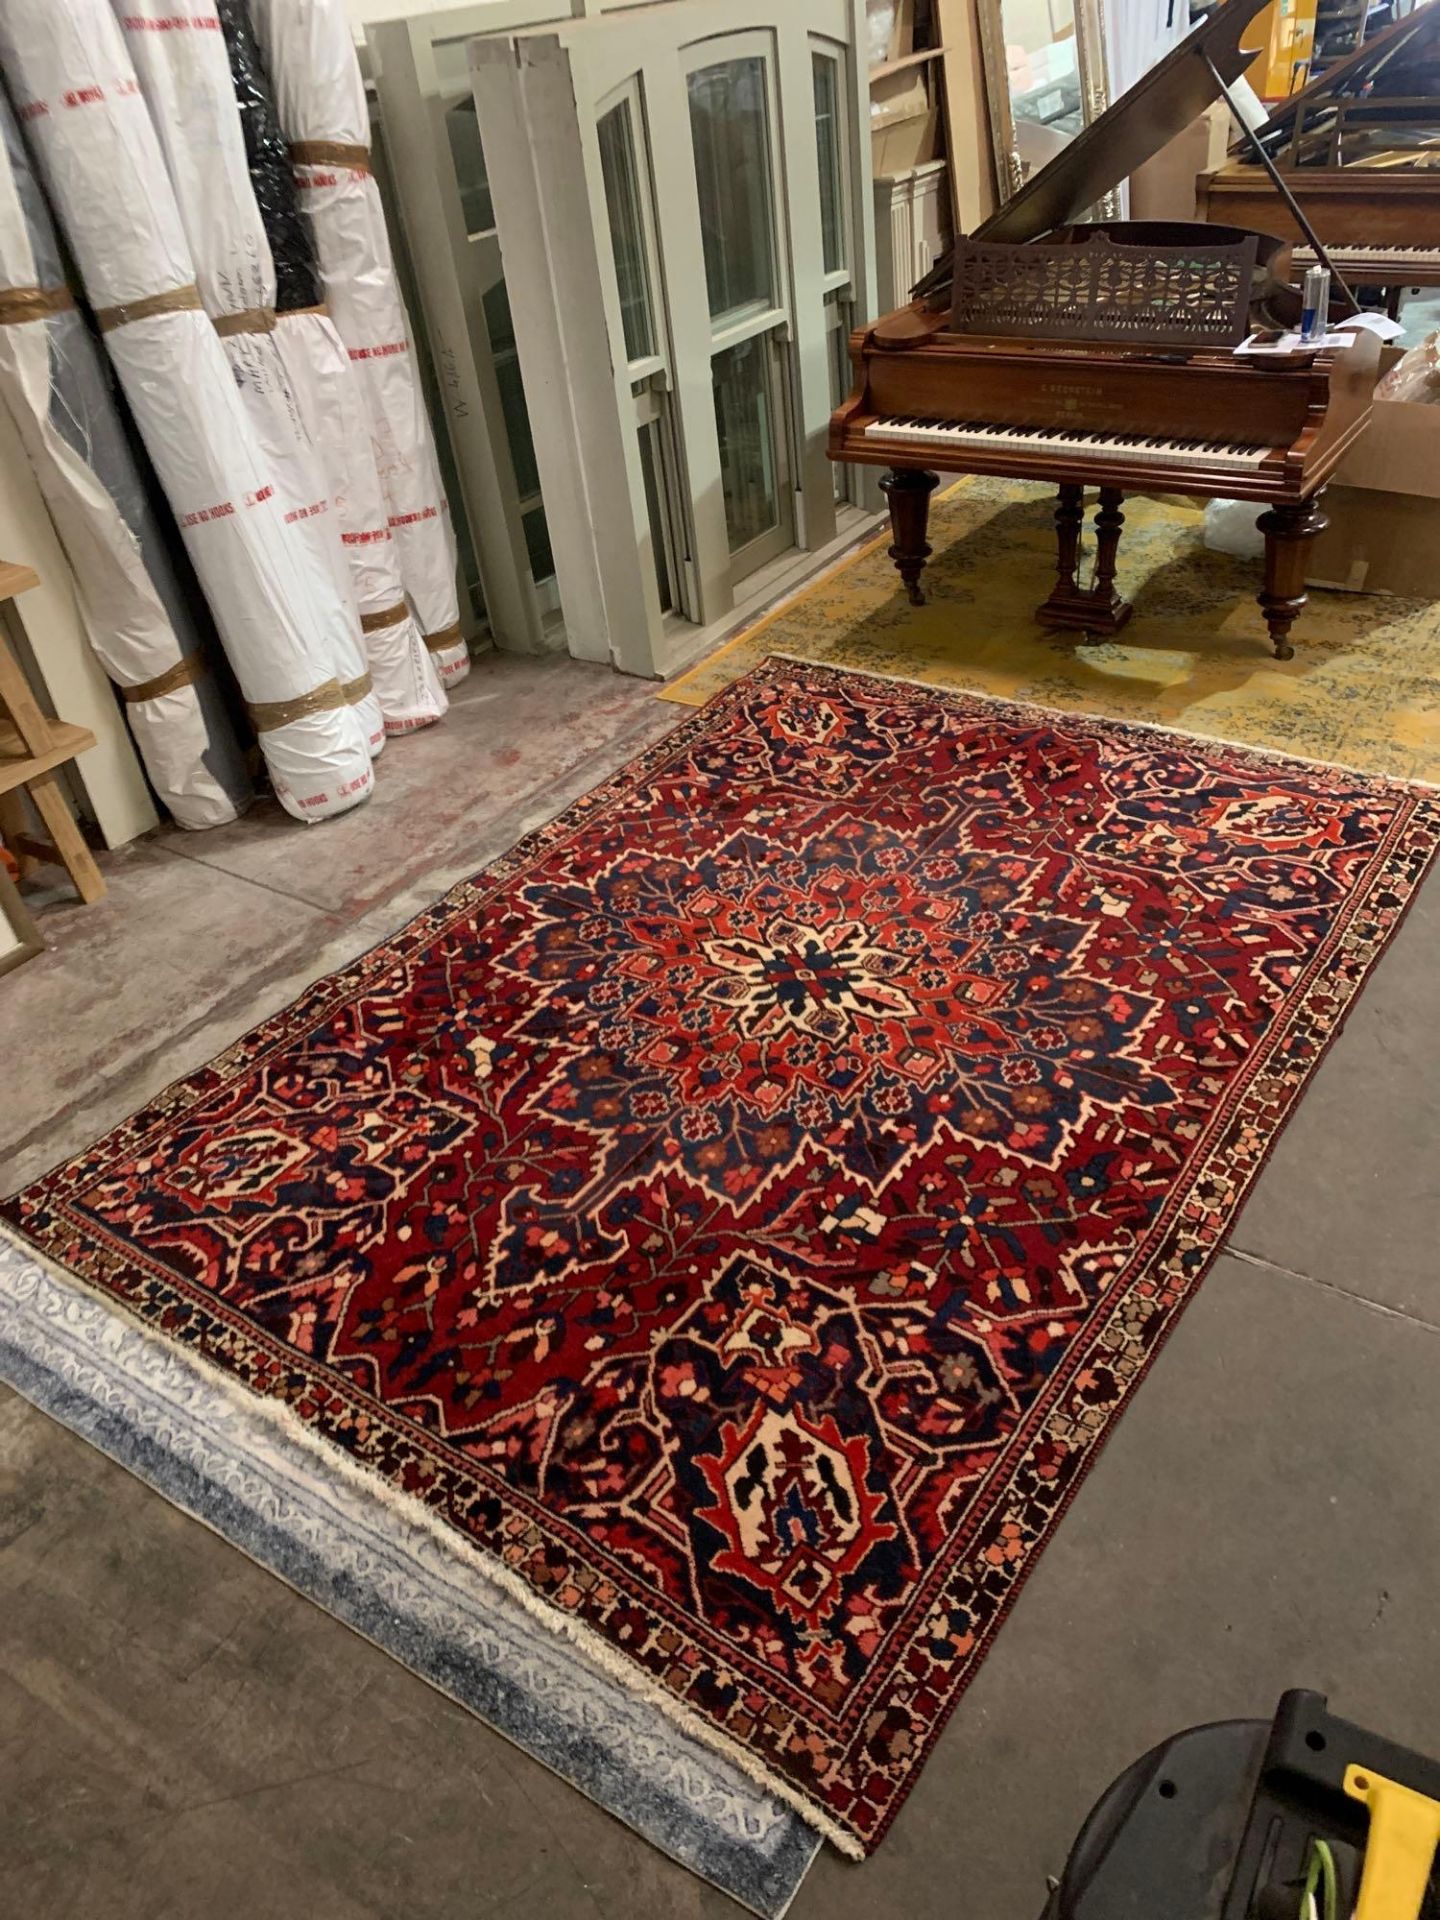 Azerbaijani Style Carpet Wool Pile Quality And High Artistic Value Hand Made Red Ground With A - Image 8 of 8